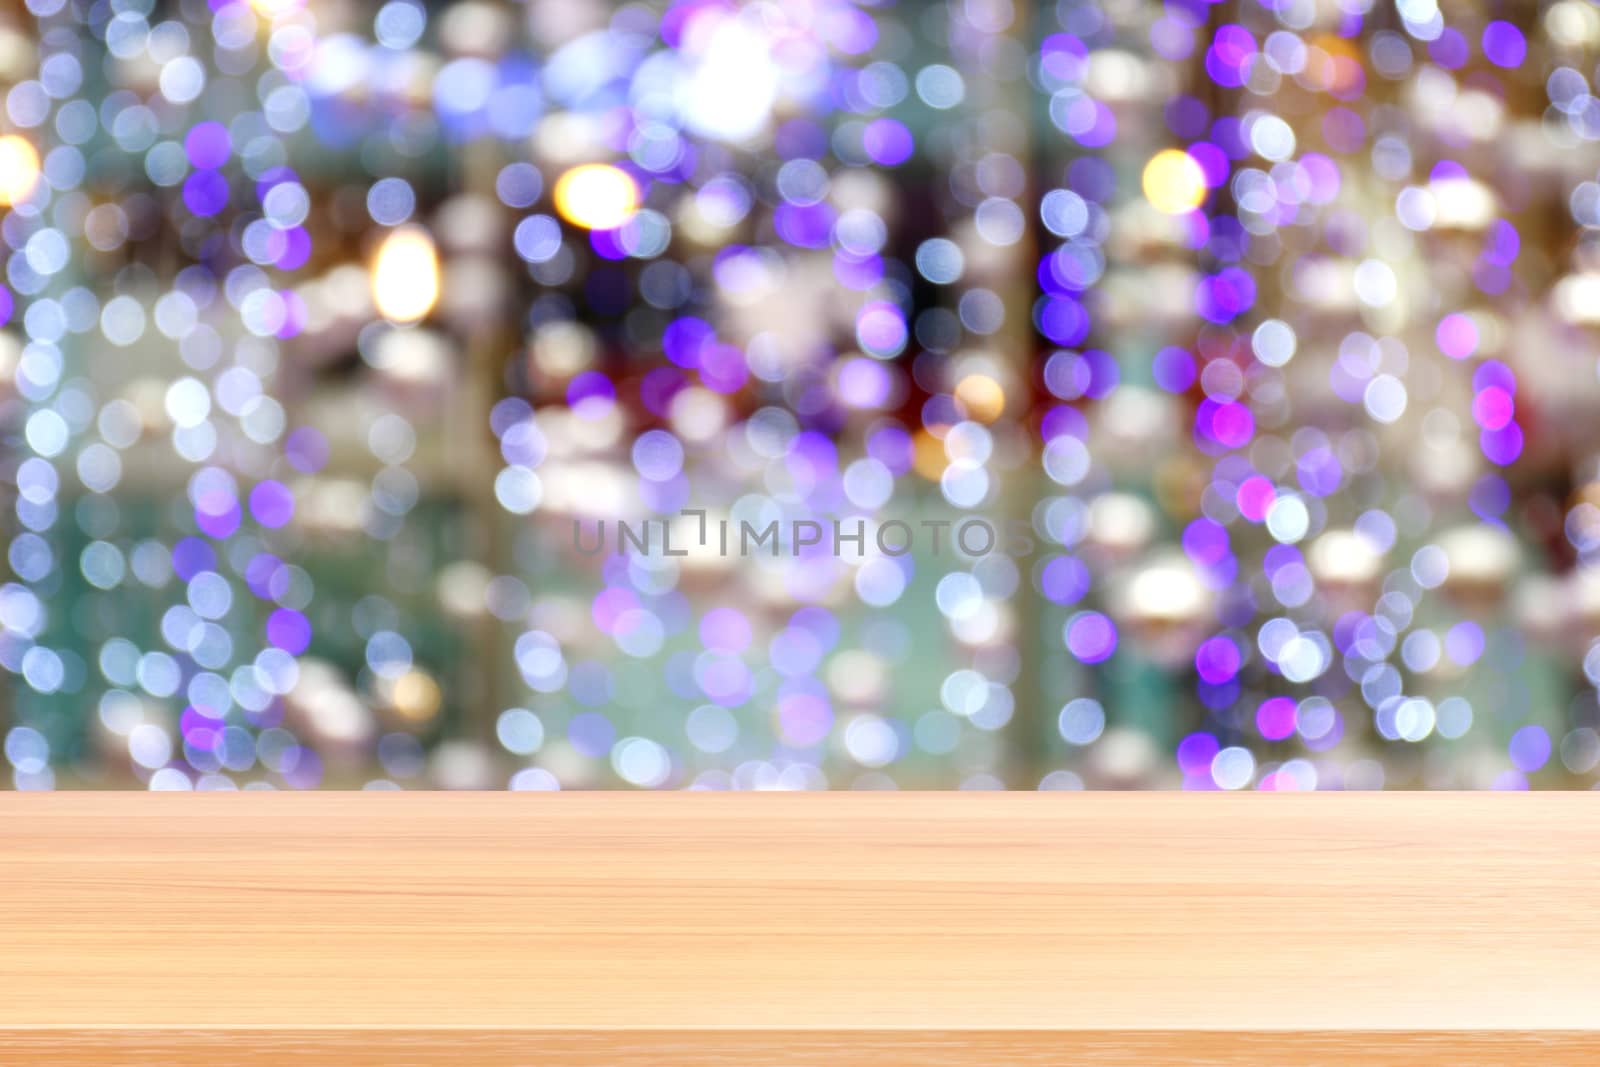 wood plank on bokeh purple lighting vivid colorful abstract background, empty wood table floors lighting decoration in shopping mall, wood table board empty front violet bokeh glitter interior light